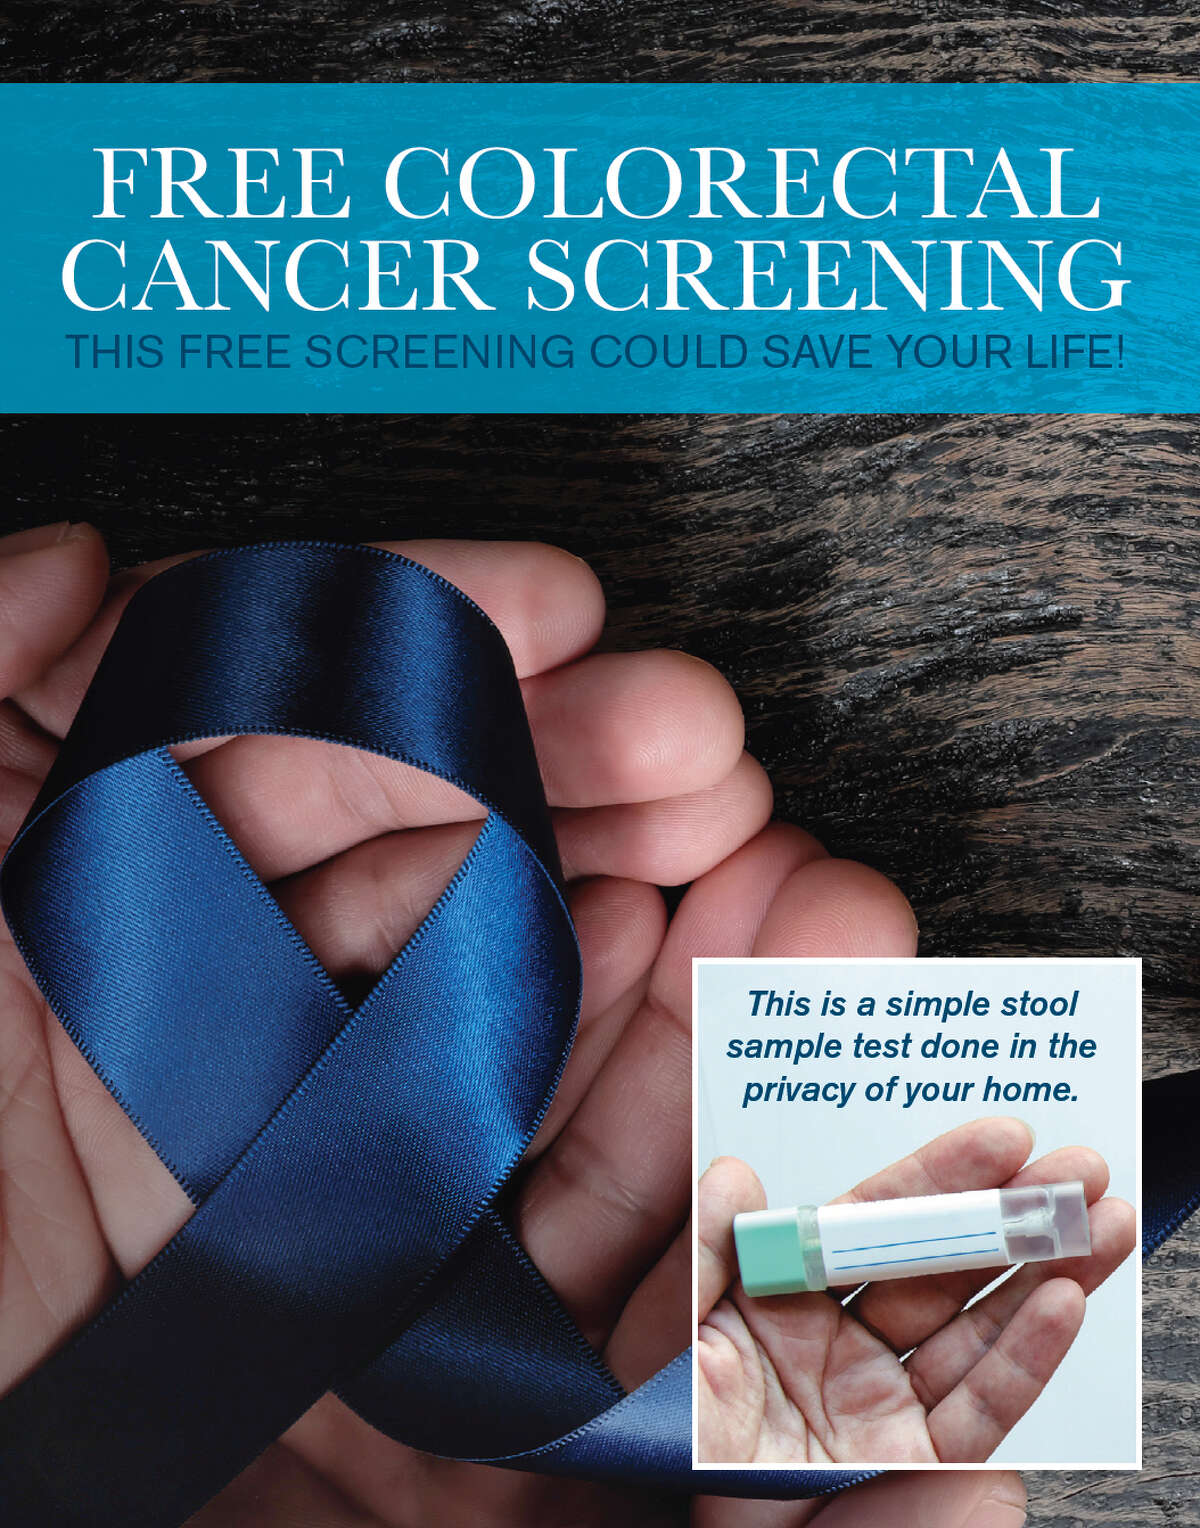 McLaren Thumb Region and McLaren Caro Region hospitals will be giving out free colorectal cancer screening kits for those who register by March 15, in Caro and March 22, in Bad Axe. 